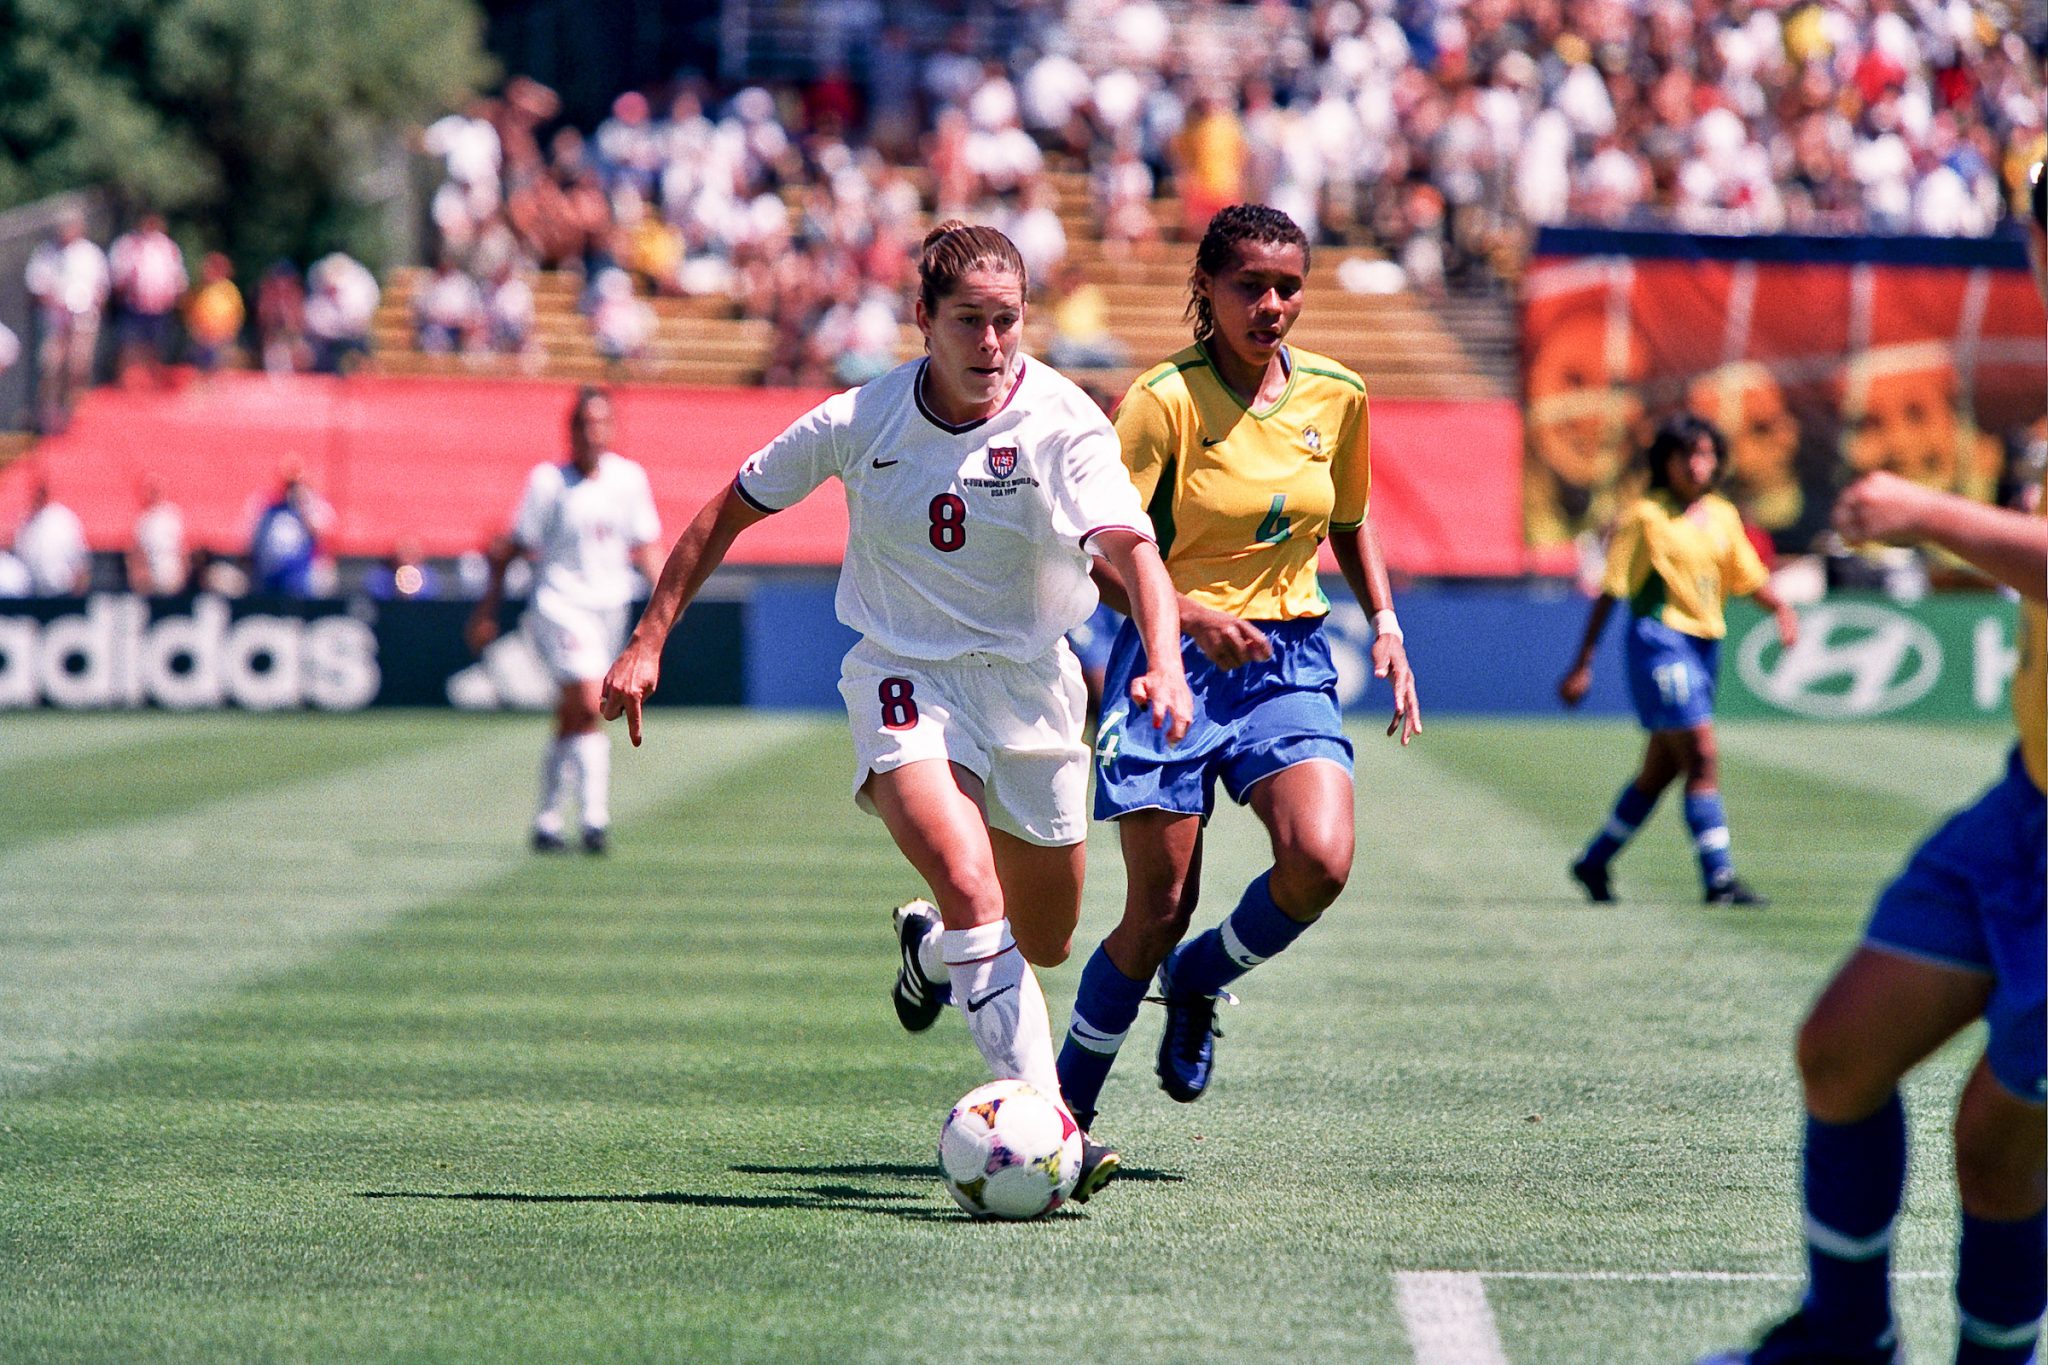 Stanford, CA - July 4, 1999; FIFA Women's World Cup 1999. Semifinals, USA 2 - Brazil 0.